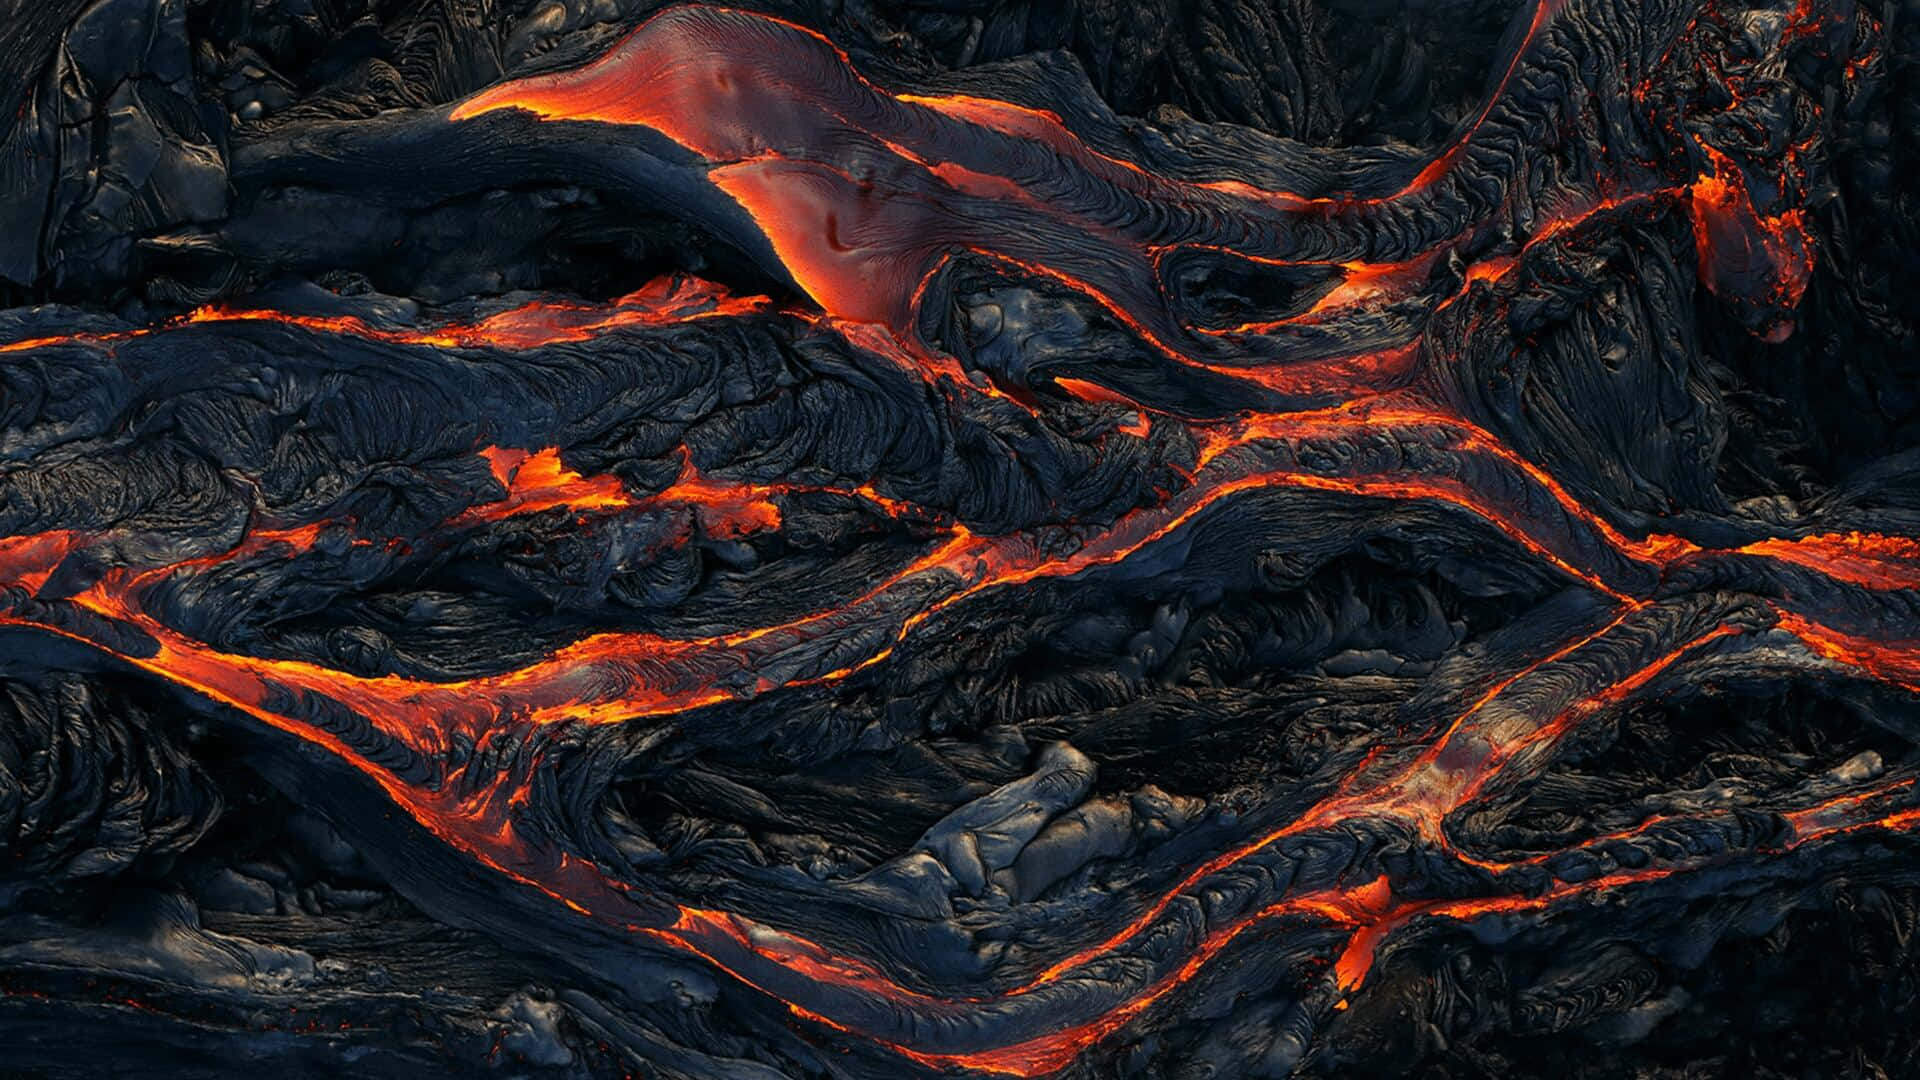 Red hot molten lava oozing through a black and grey rocky surface